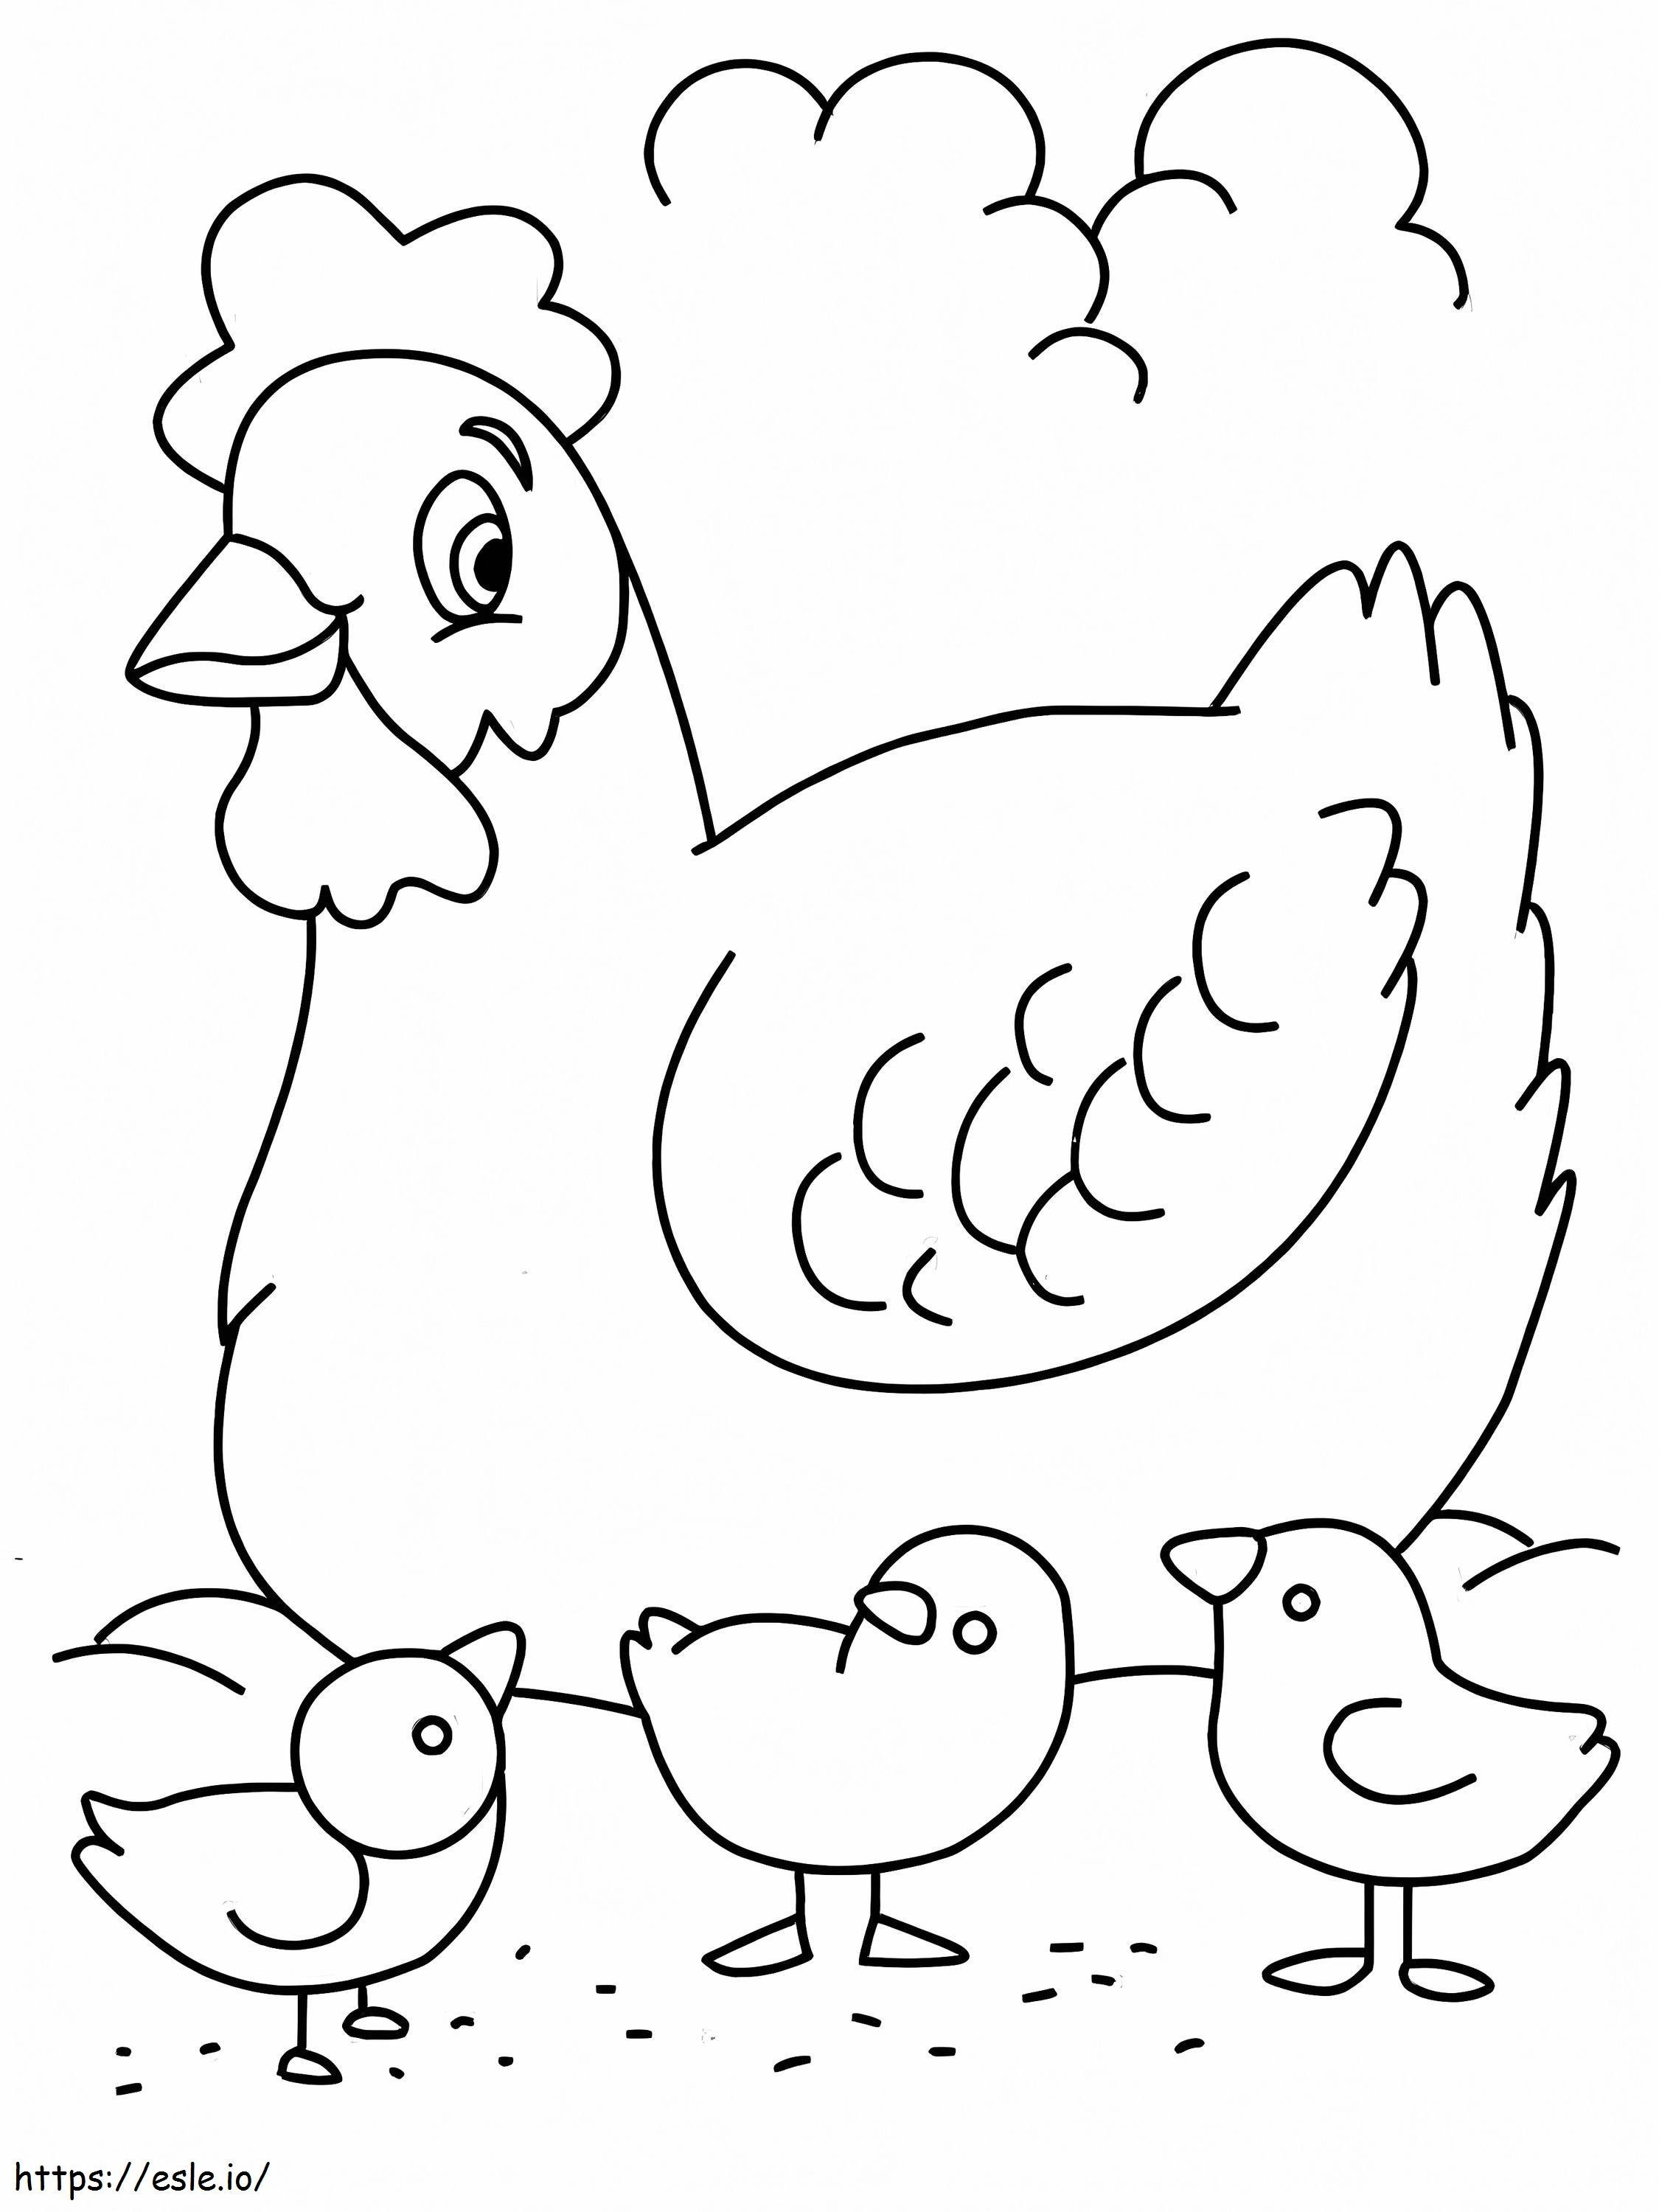 Cartoon Chicken And Chicks coloring page